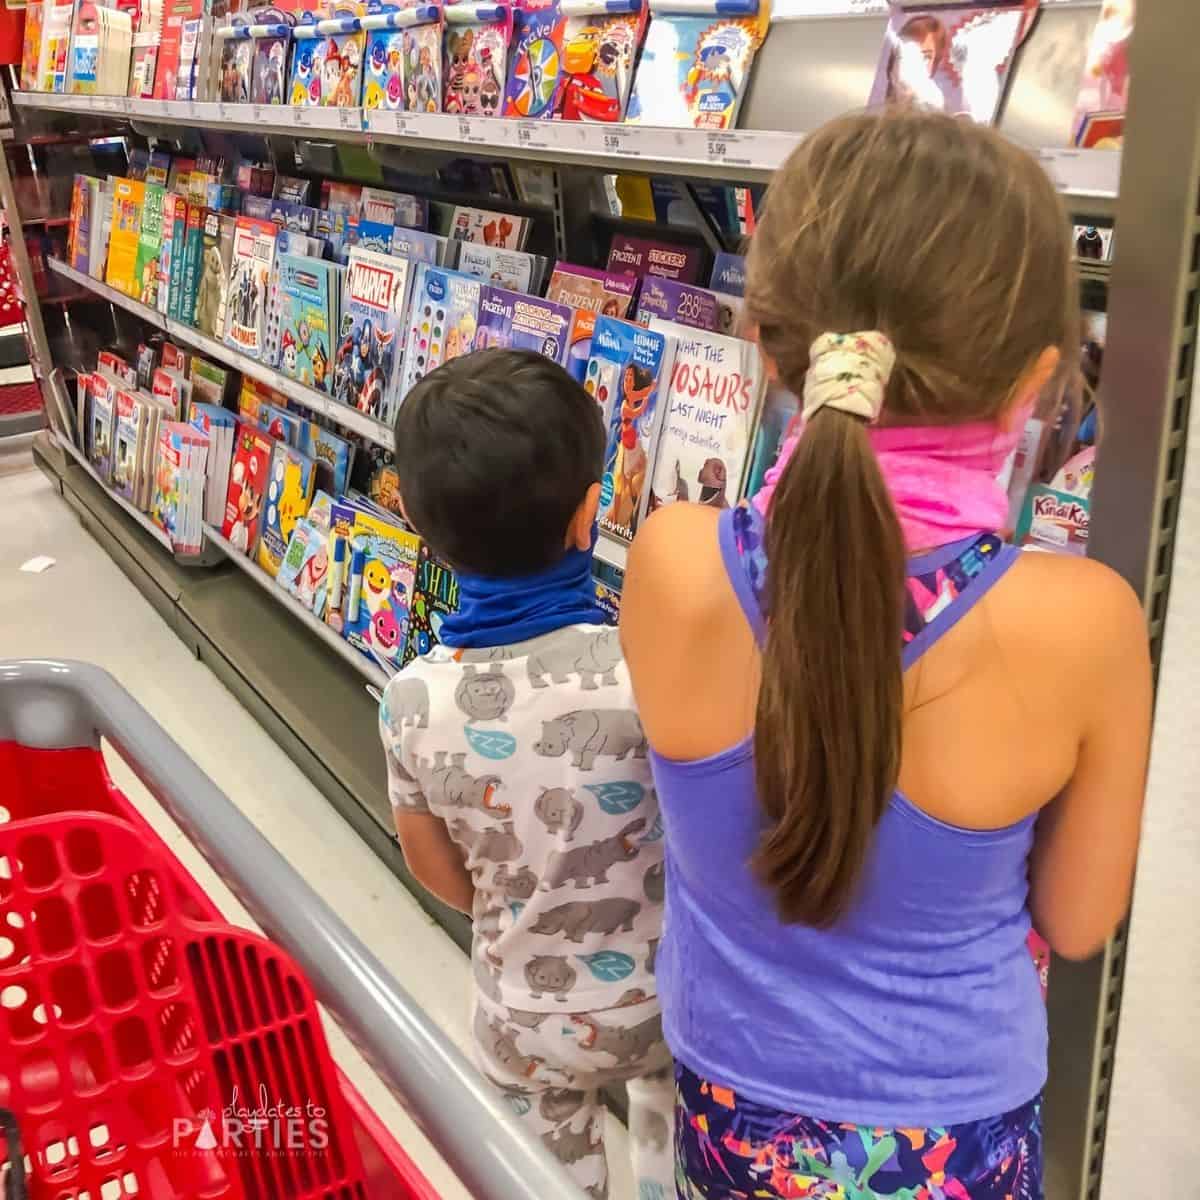 image of a boy in pajamas and an older girl shopping in the Target book aisle.